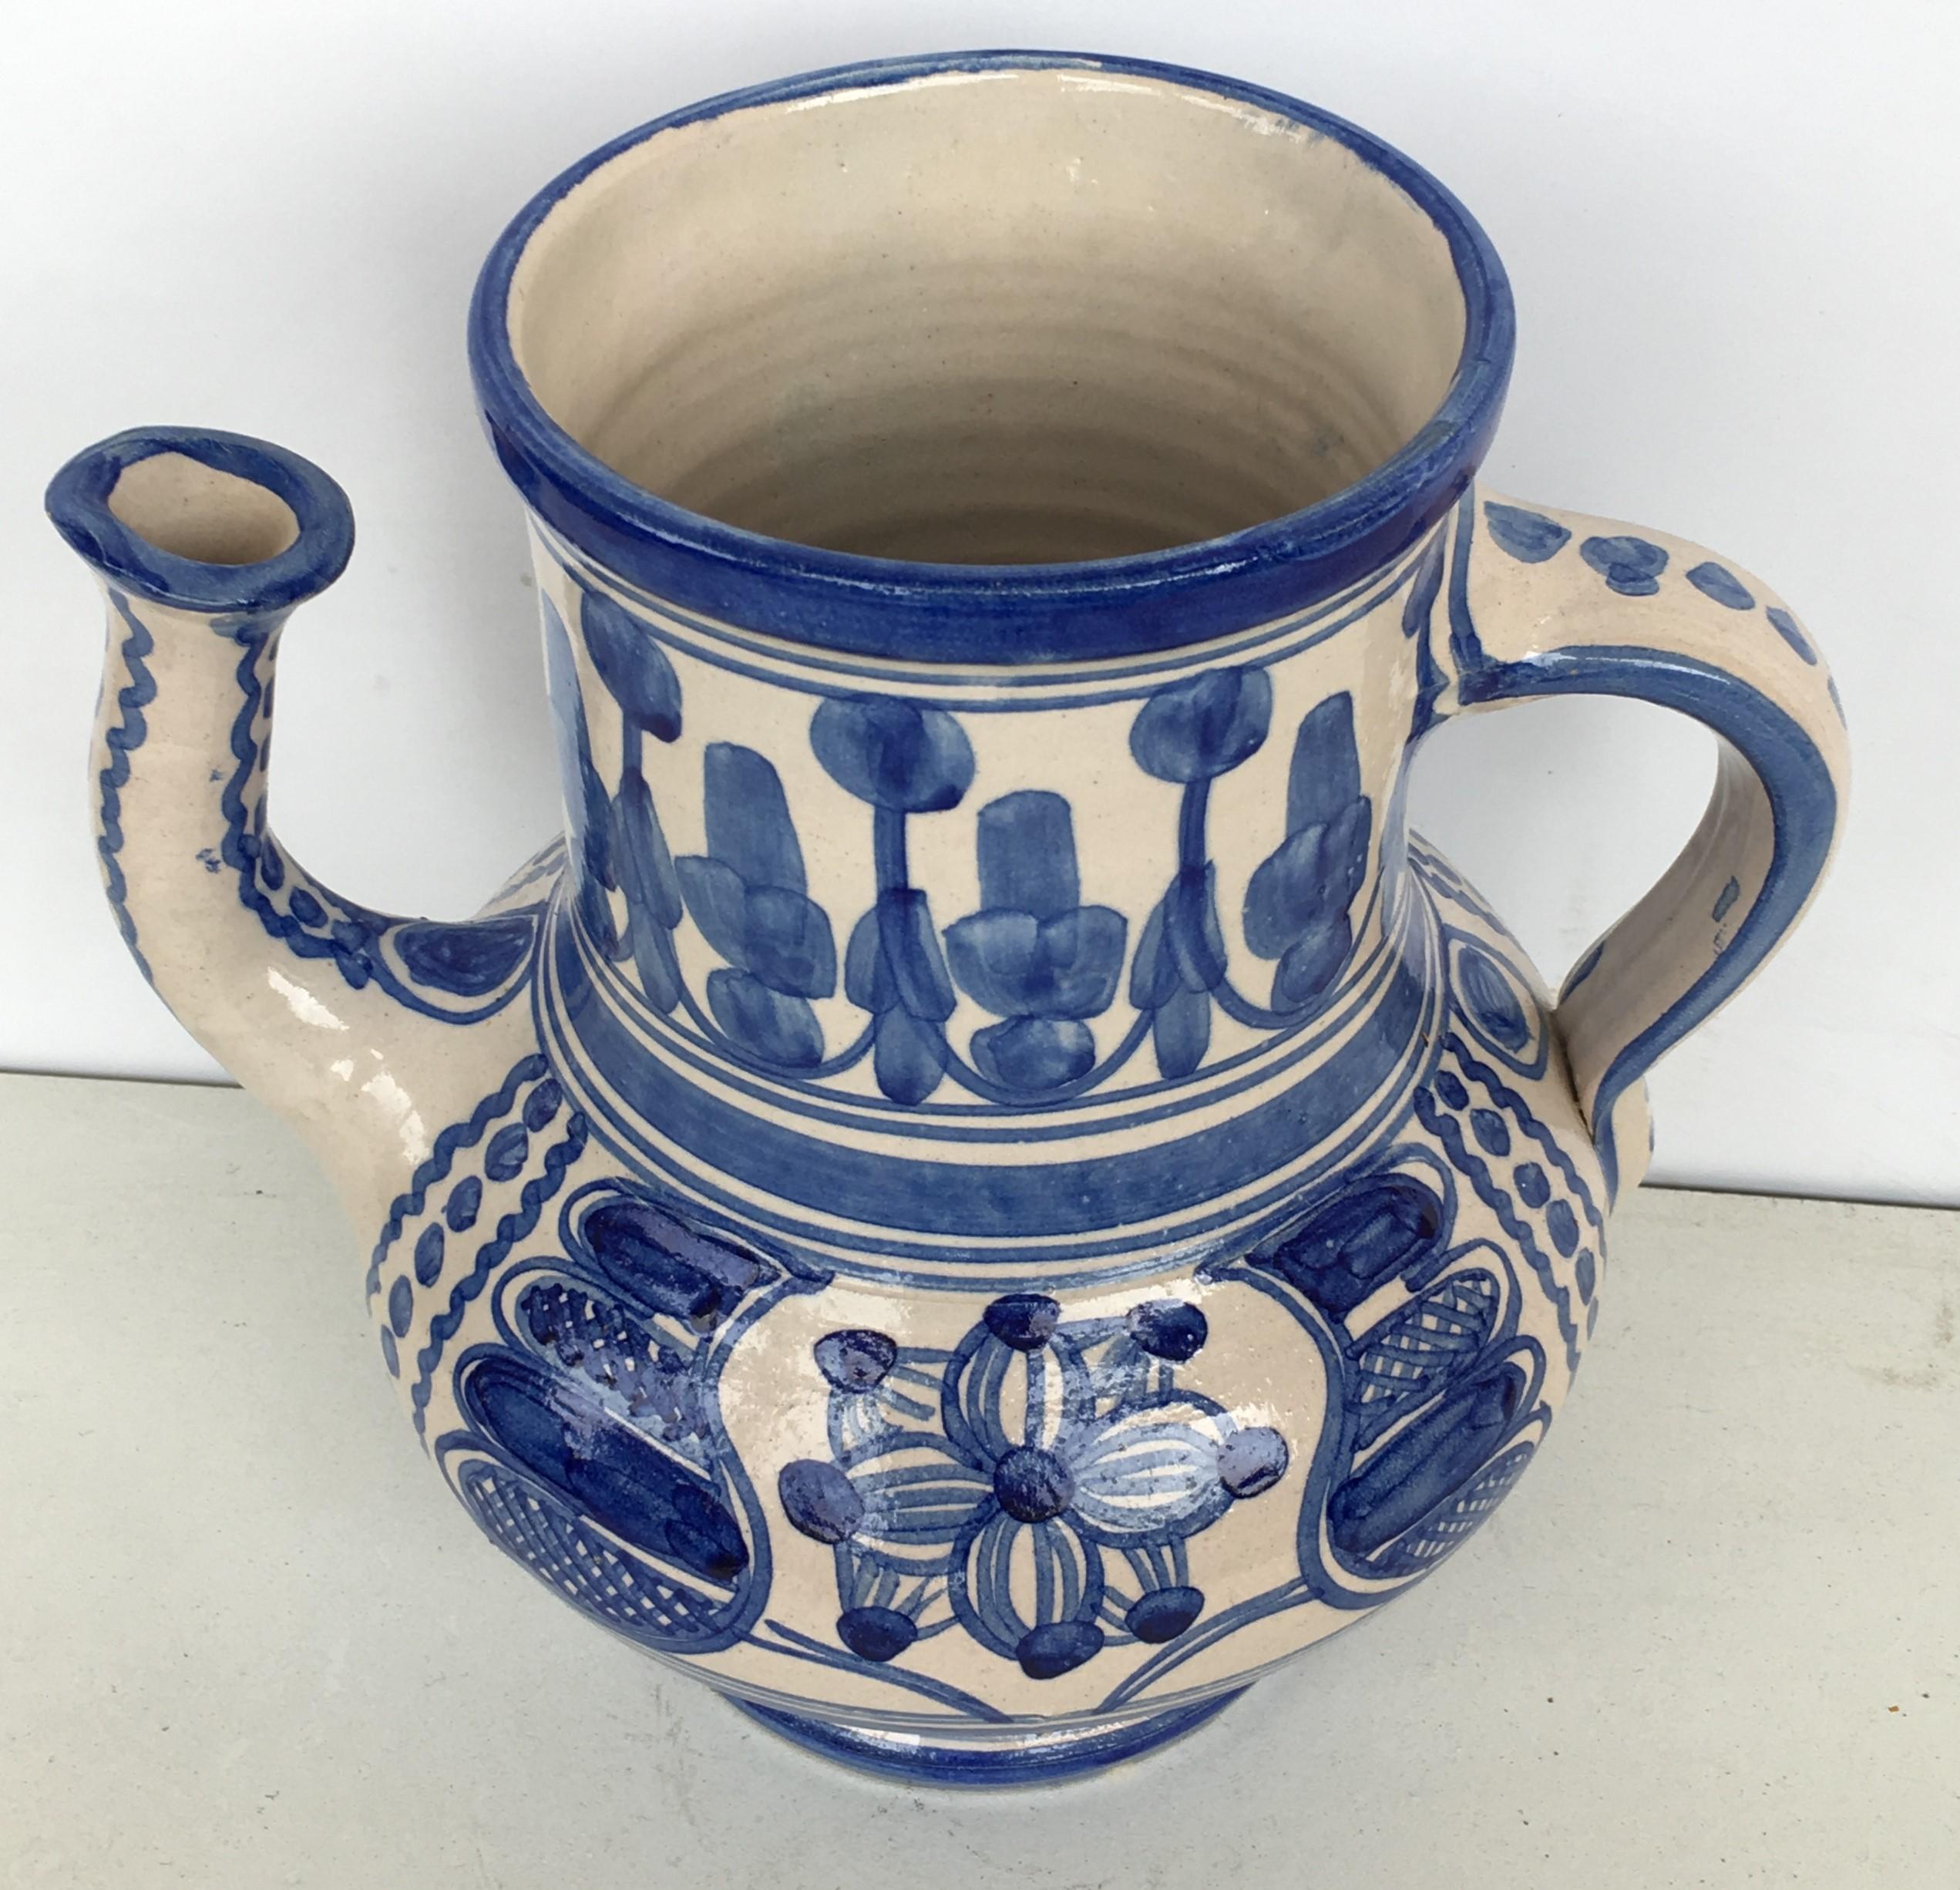 Spanish Colonial 20th Century Rare Glazed Earthenware Spanish Blue and White Pitcher